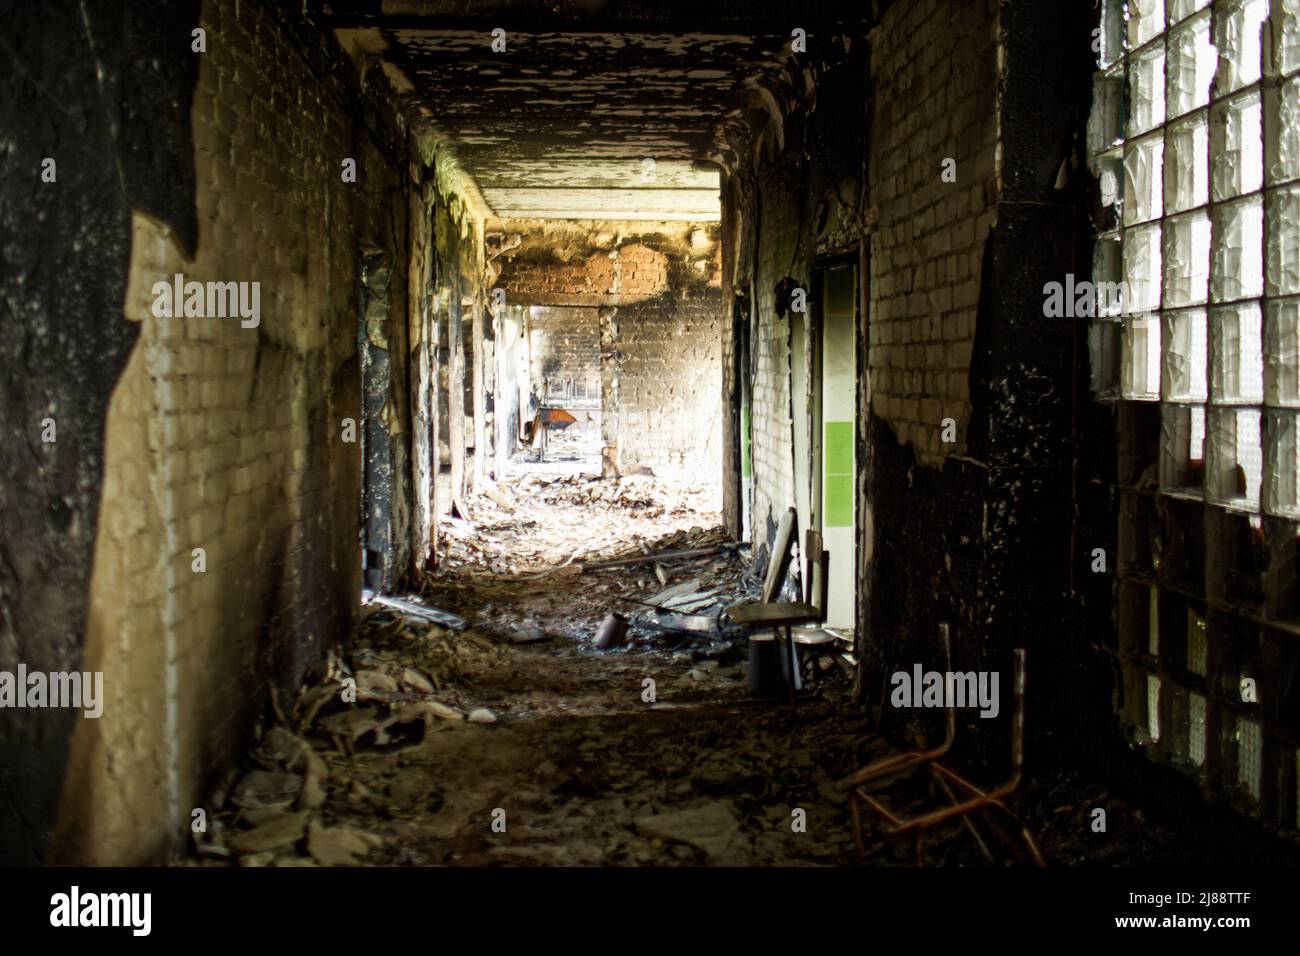 The interior of the Vil'khivka school, completely destroyed by artillery shells, site of battle between Russian and Ukrainian soldiers. Russia invaded Ukraine on 24 February 2022, triggering the largest military attack in Europe since World War II. (Photo by Marco Cordone/SOPA Images/Sipa USA) Credit: Sipa USA/Alamy Live News Stock Photo